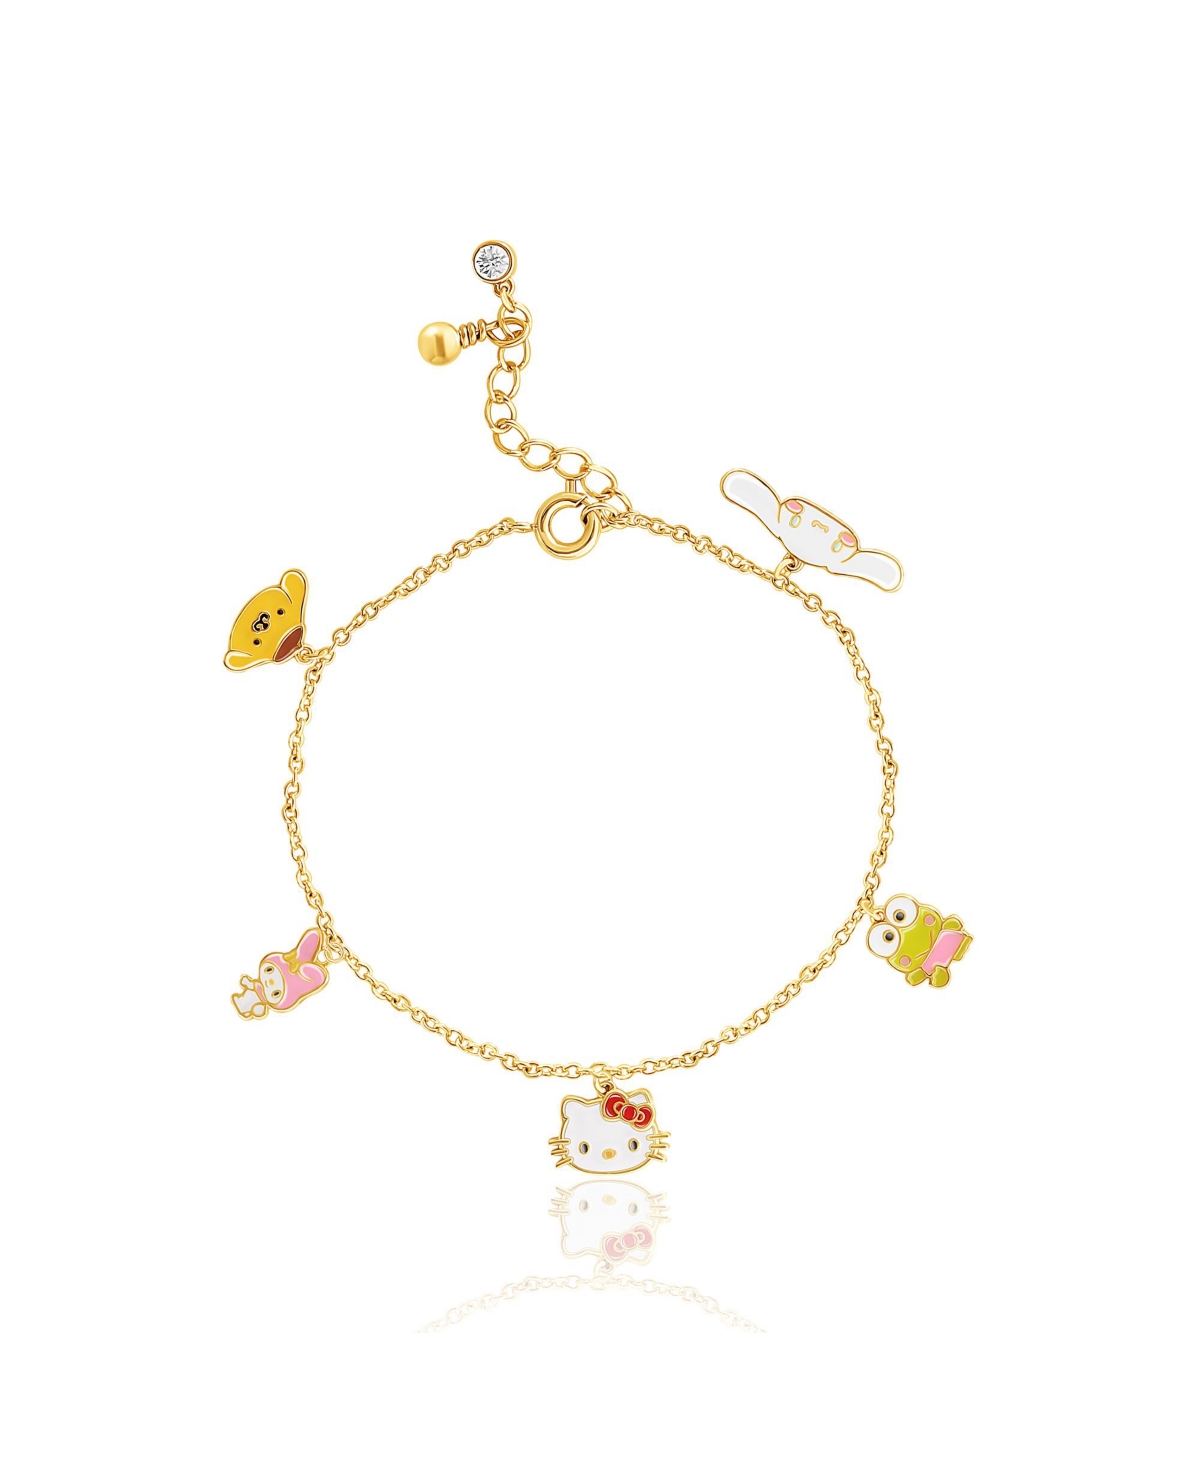 Sanrio Hello Kitty and Friends Charm Bracelet Cinnamoroll, Pompompurin, My Melody, Keroppi, Authentic Officially Licensed - Yellow, white, pink, red